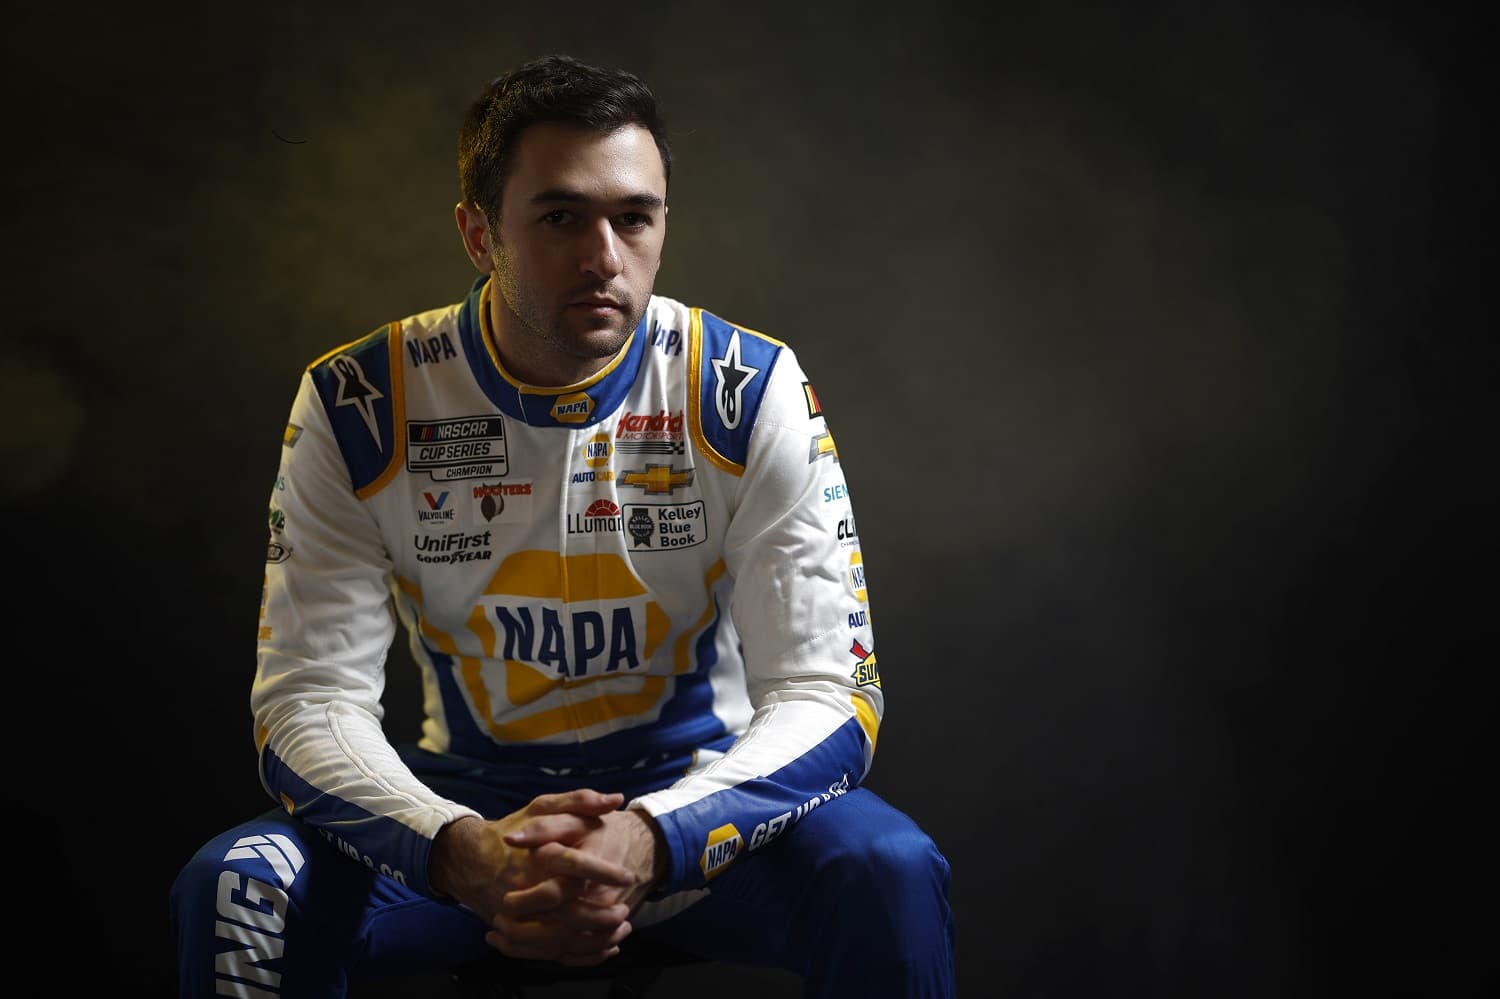 Chase Elliott poses for a photo during NASCAR Production Days at Charlotte Convention Center on Jan. 17, 2023.